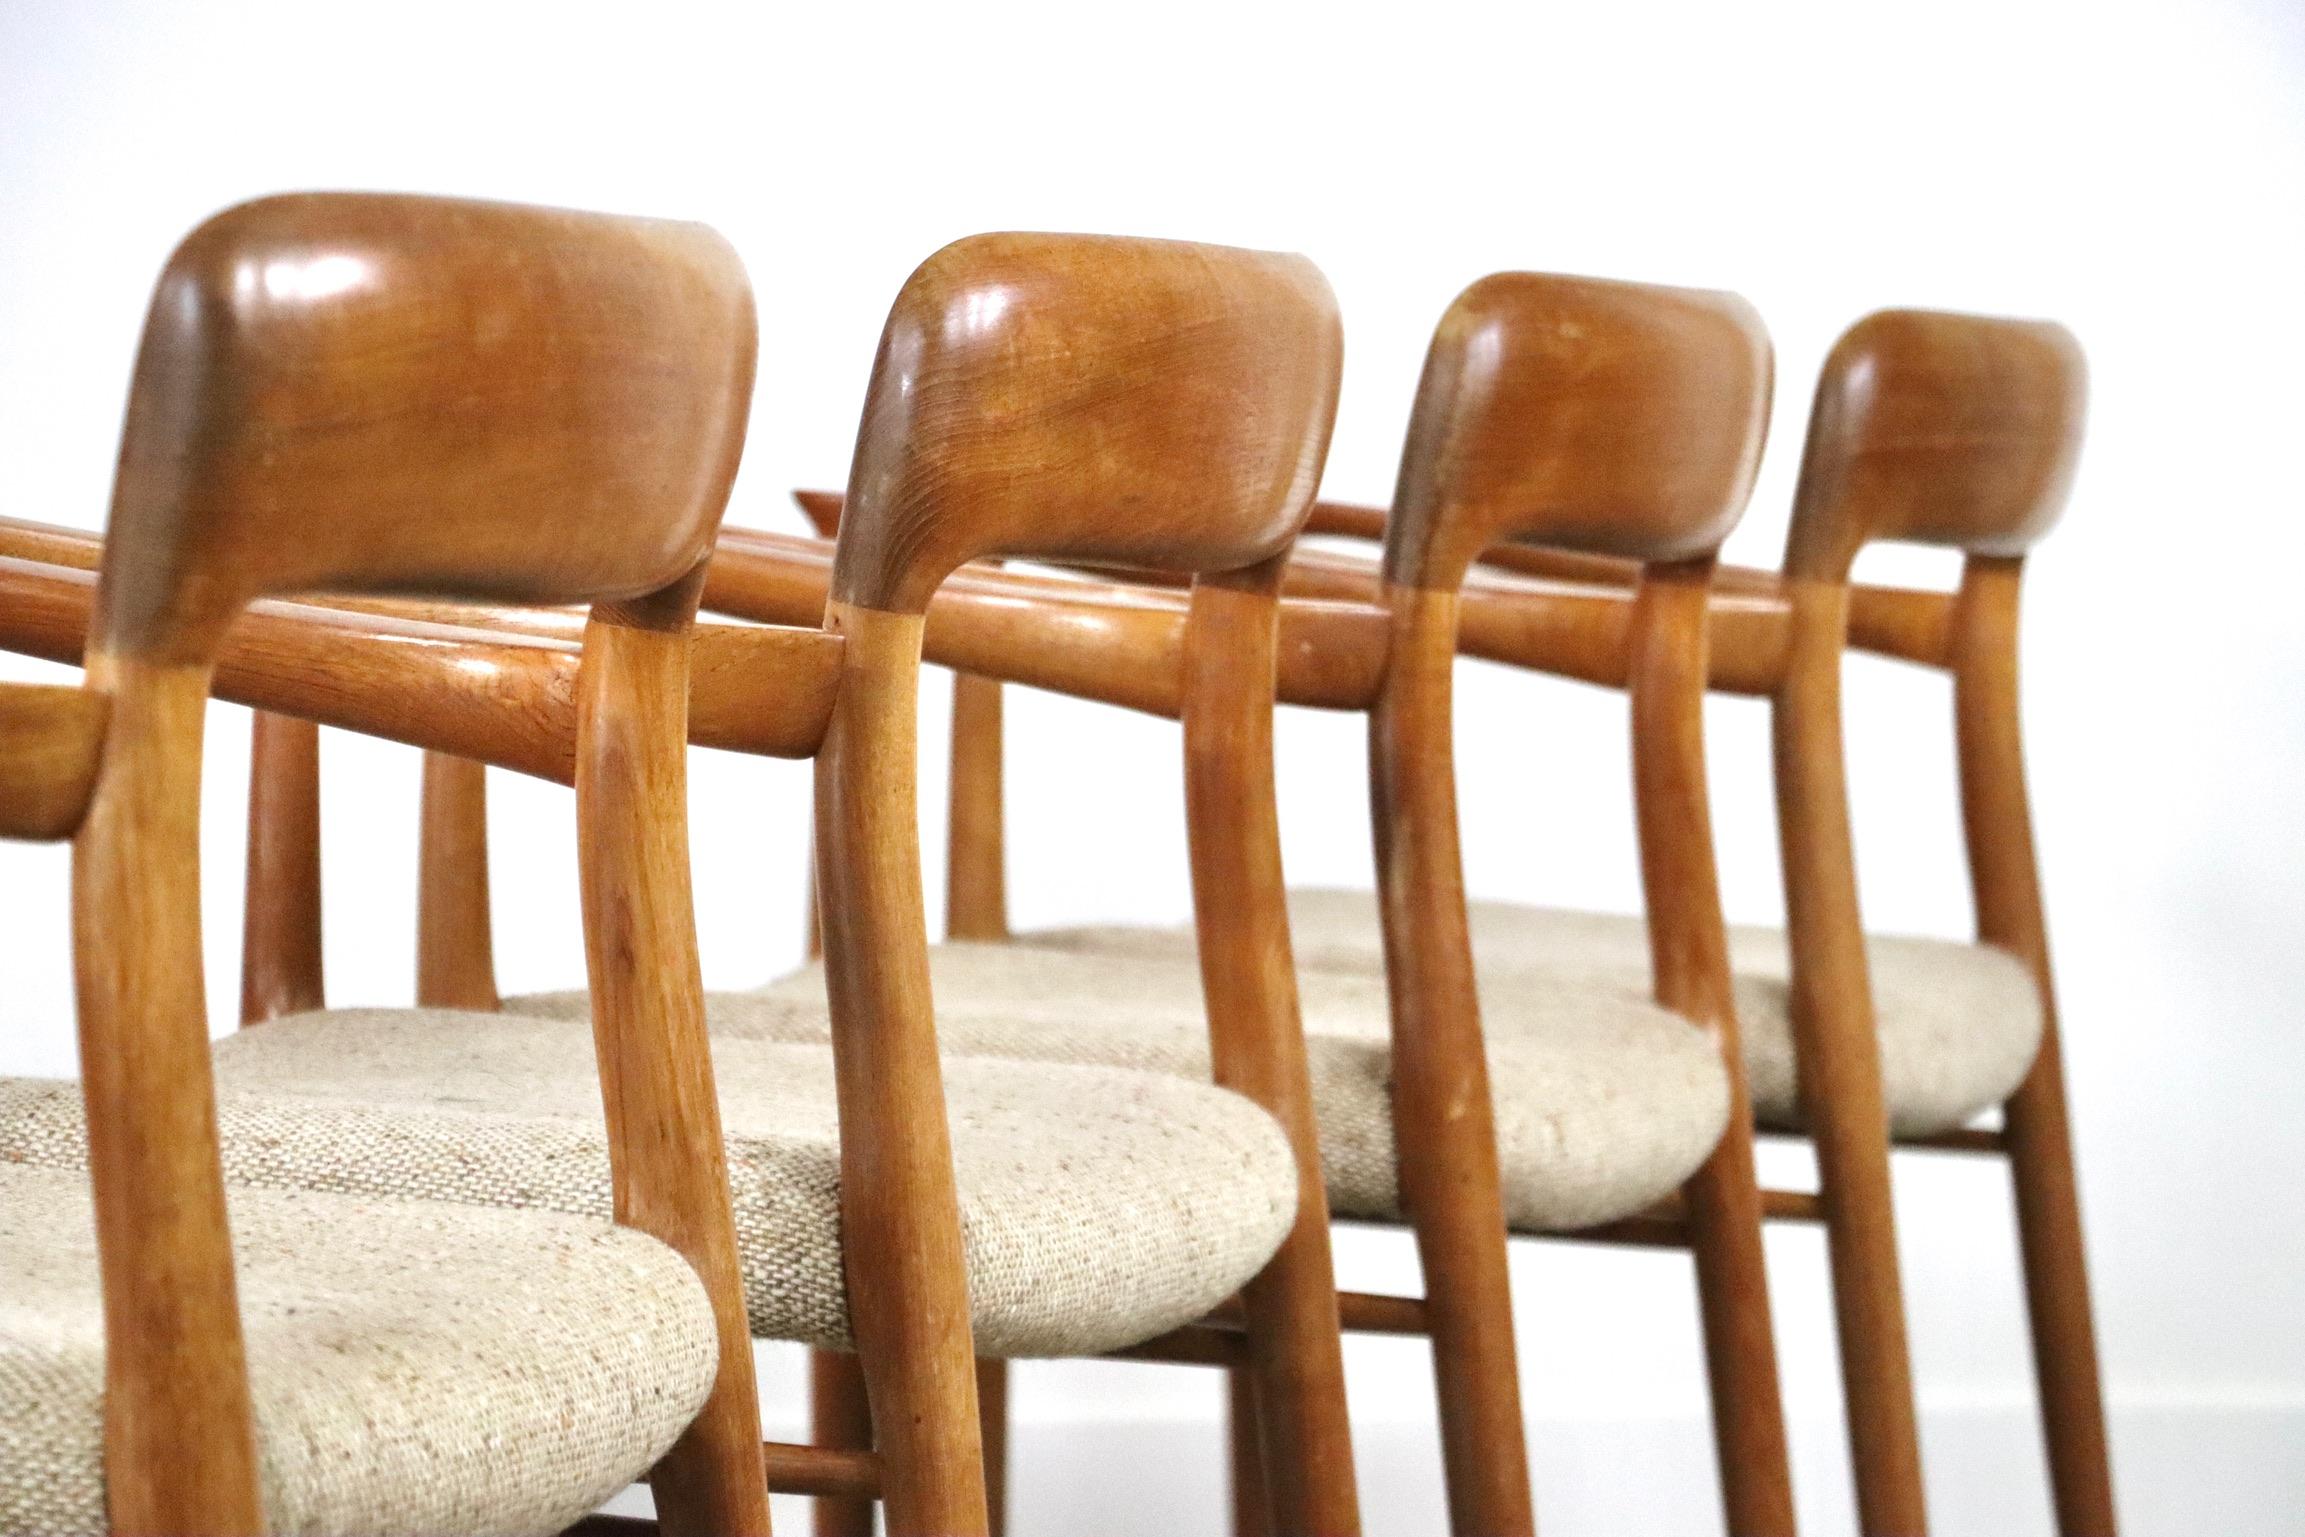 Incredible set of 4 Model 56 oak dining chairs with sculpted arm rests designed in the 1950s by Niels Otto Møller for J.L. Møller. Beautiful oak frame which complements the beige/ cream wool upholstery on the seatings. A sophisticated set to elevate